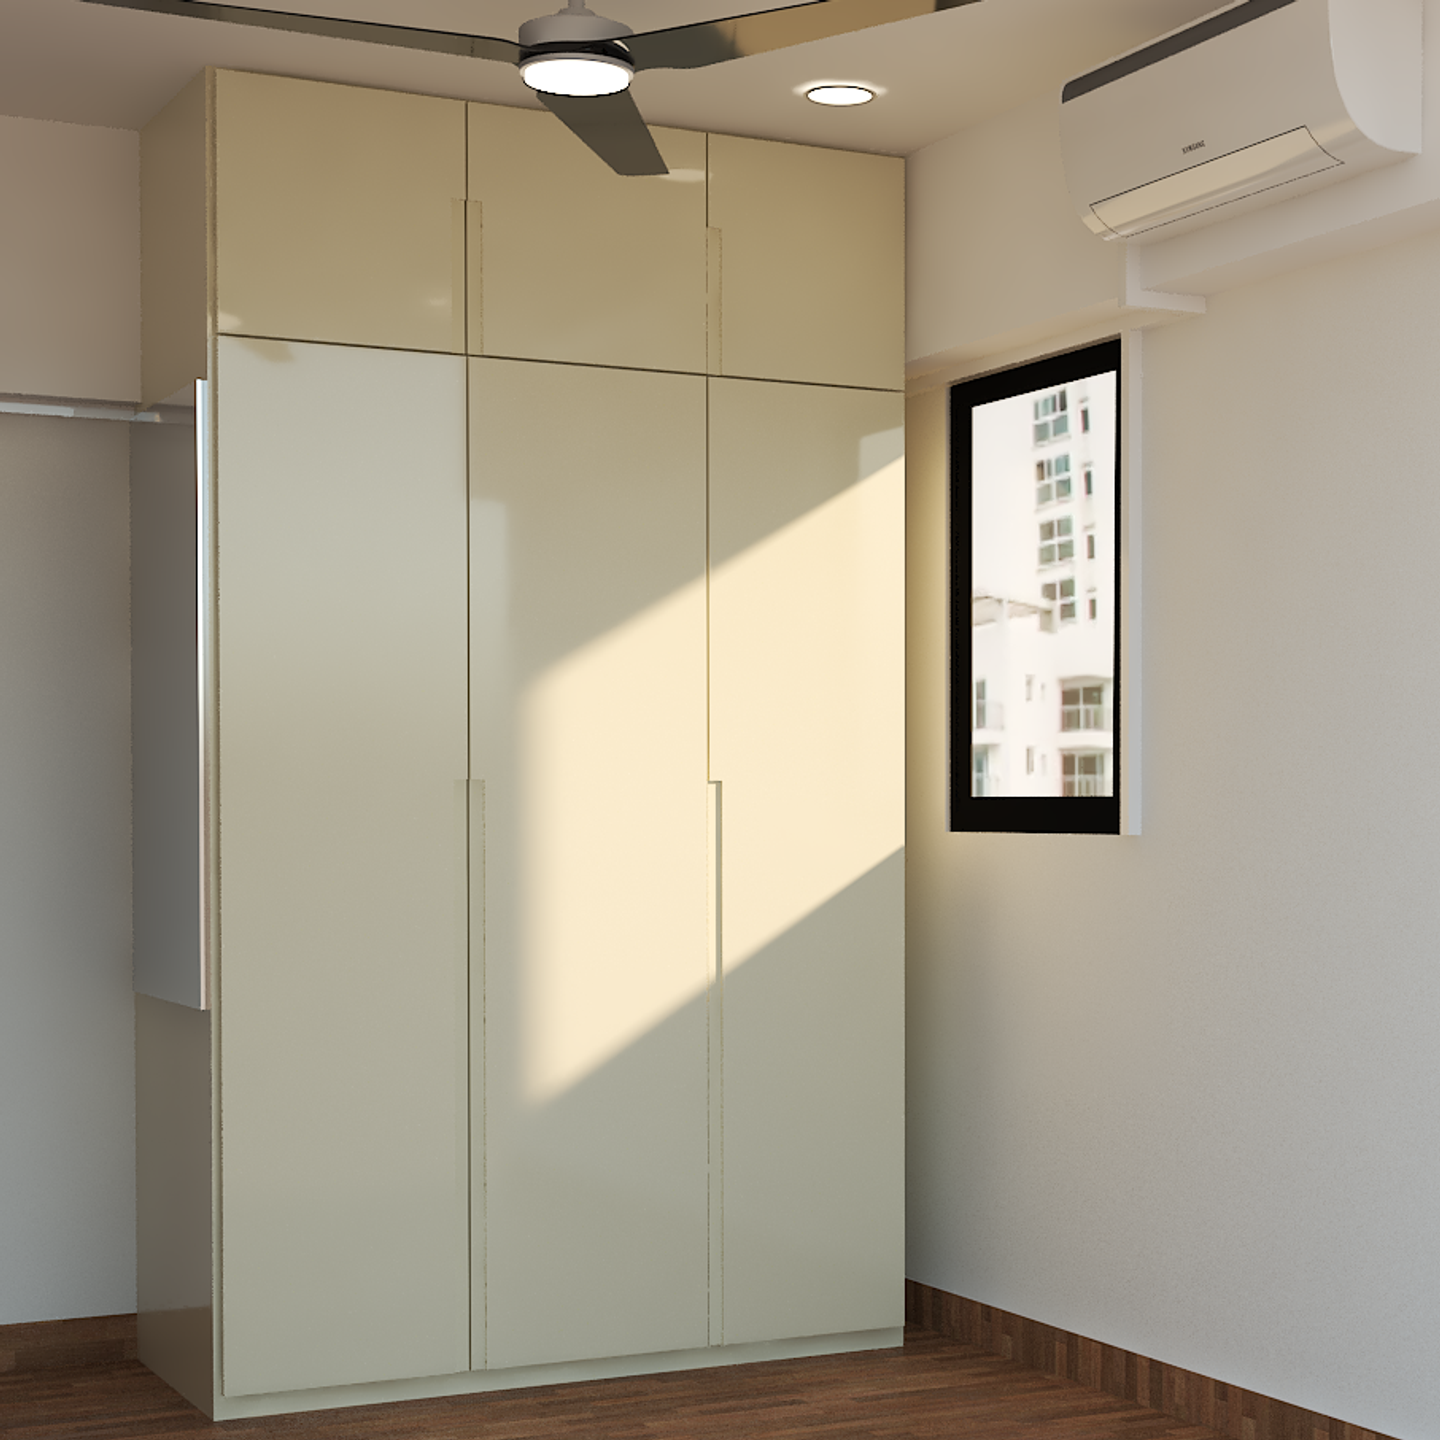 Light Compact Wardrobe Design with Groove Handles - Livspace